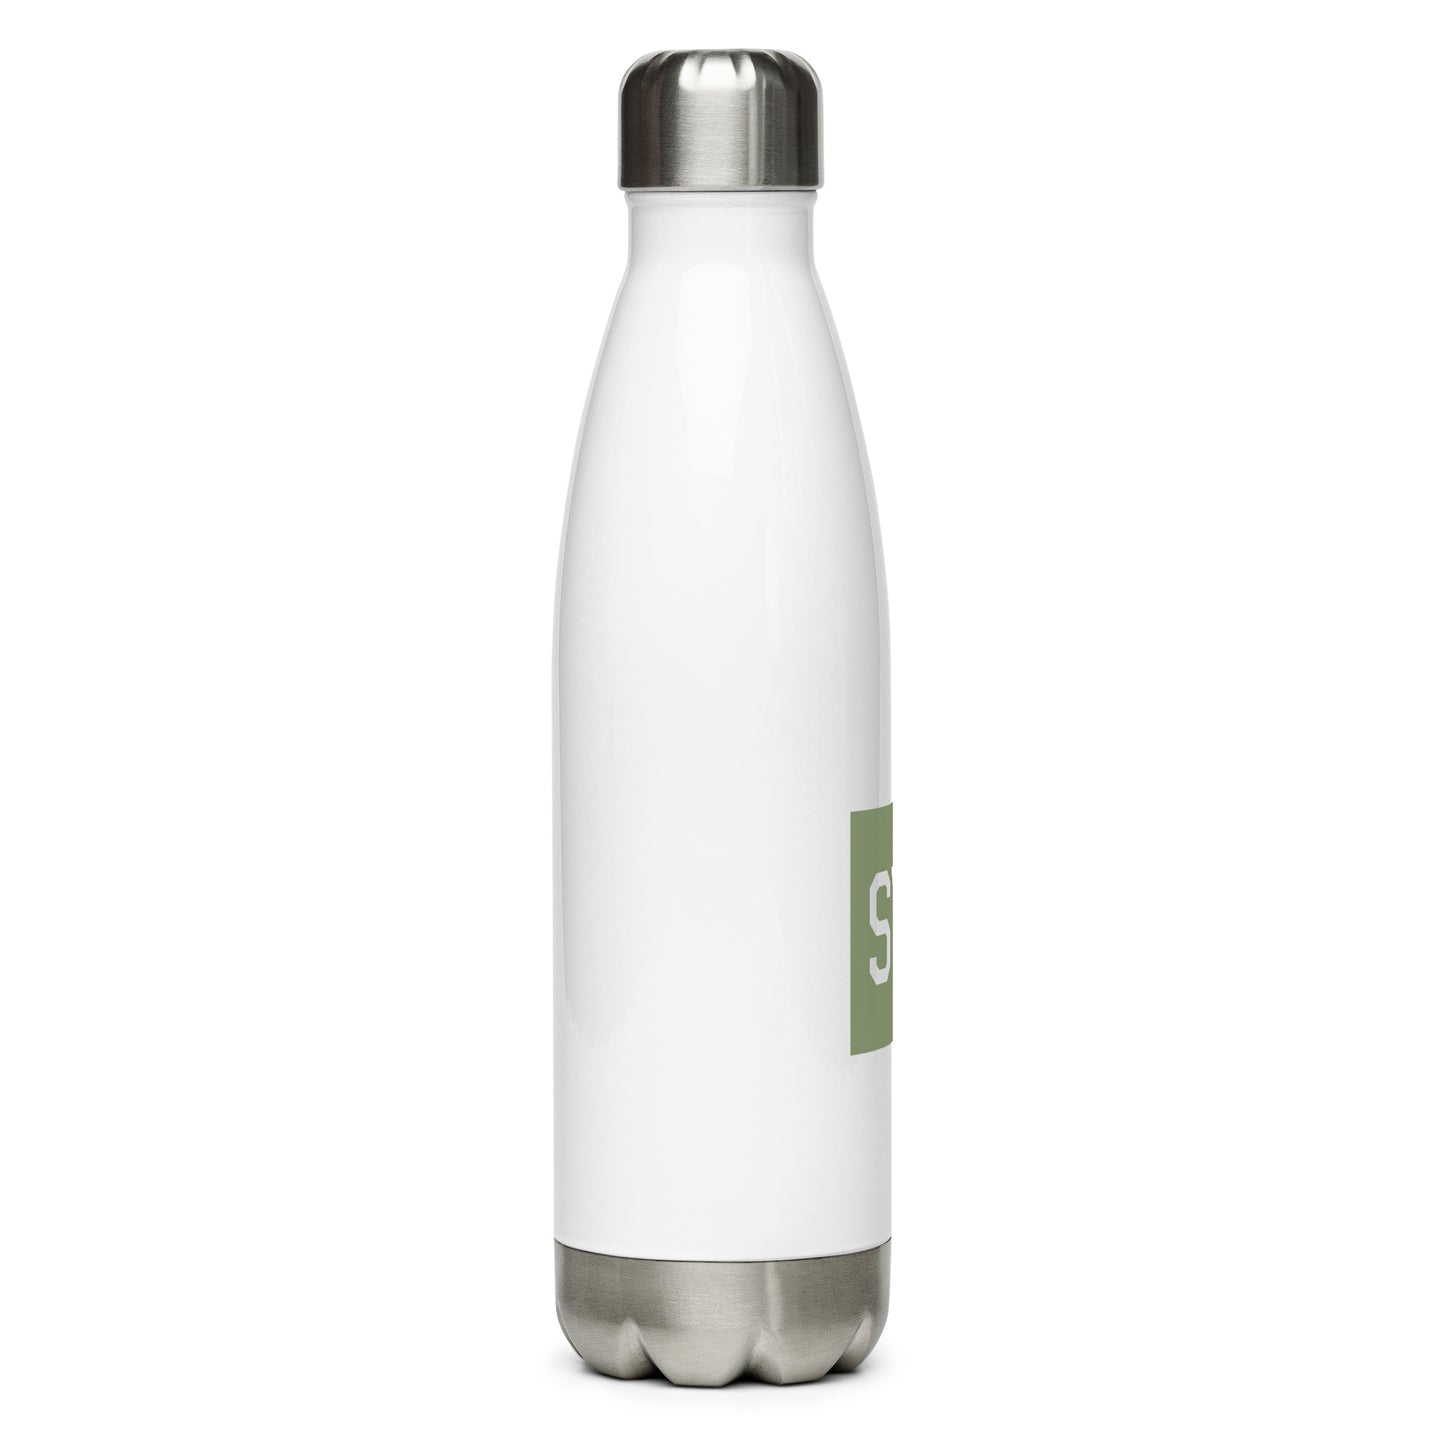 Aviation Gift Water Bottle - Camo Green • SYD Sydney • YHM Designs - Image 07